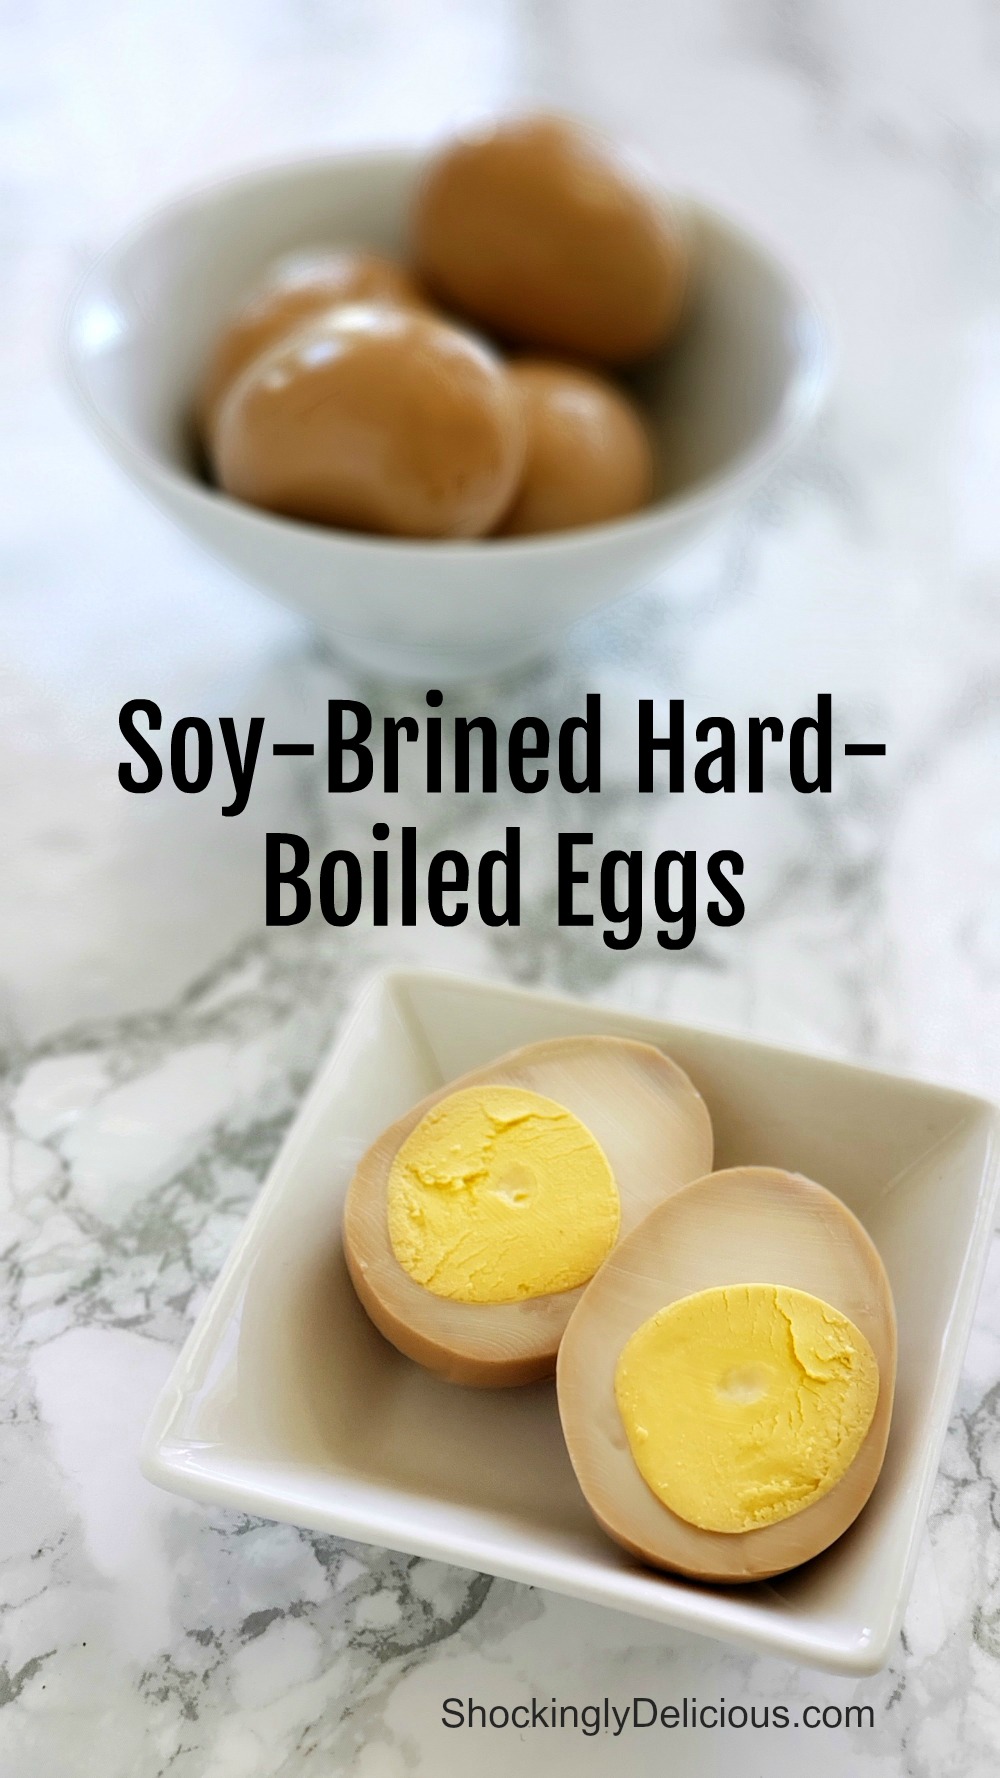 1 Soy-Brined Hard-Boiled Egg cut apart with insides showing in the foreground, and a white bowl with 4 whole soy-brined eggs in the background, on a white marple counter